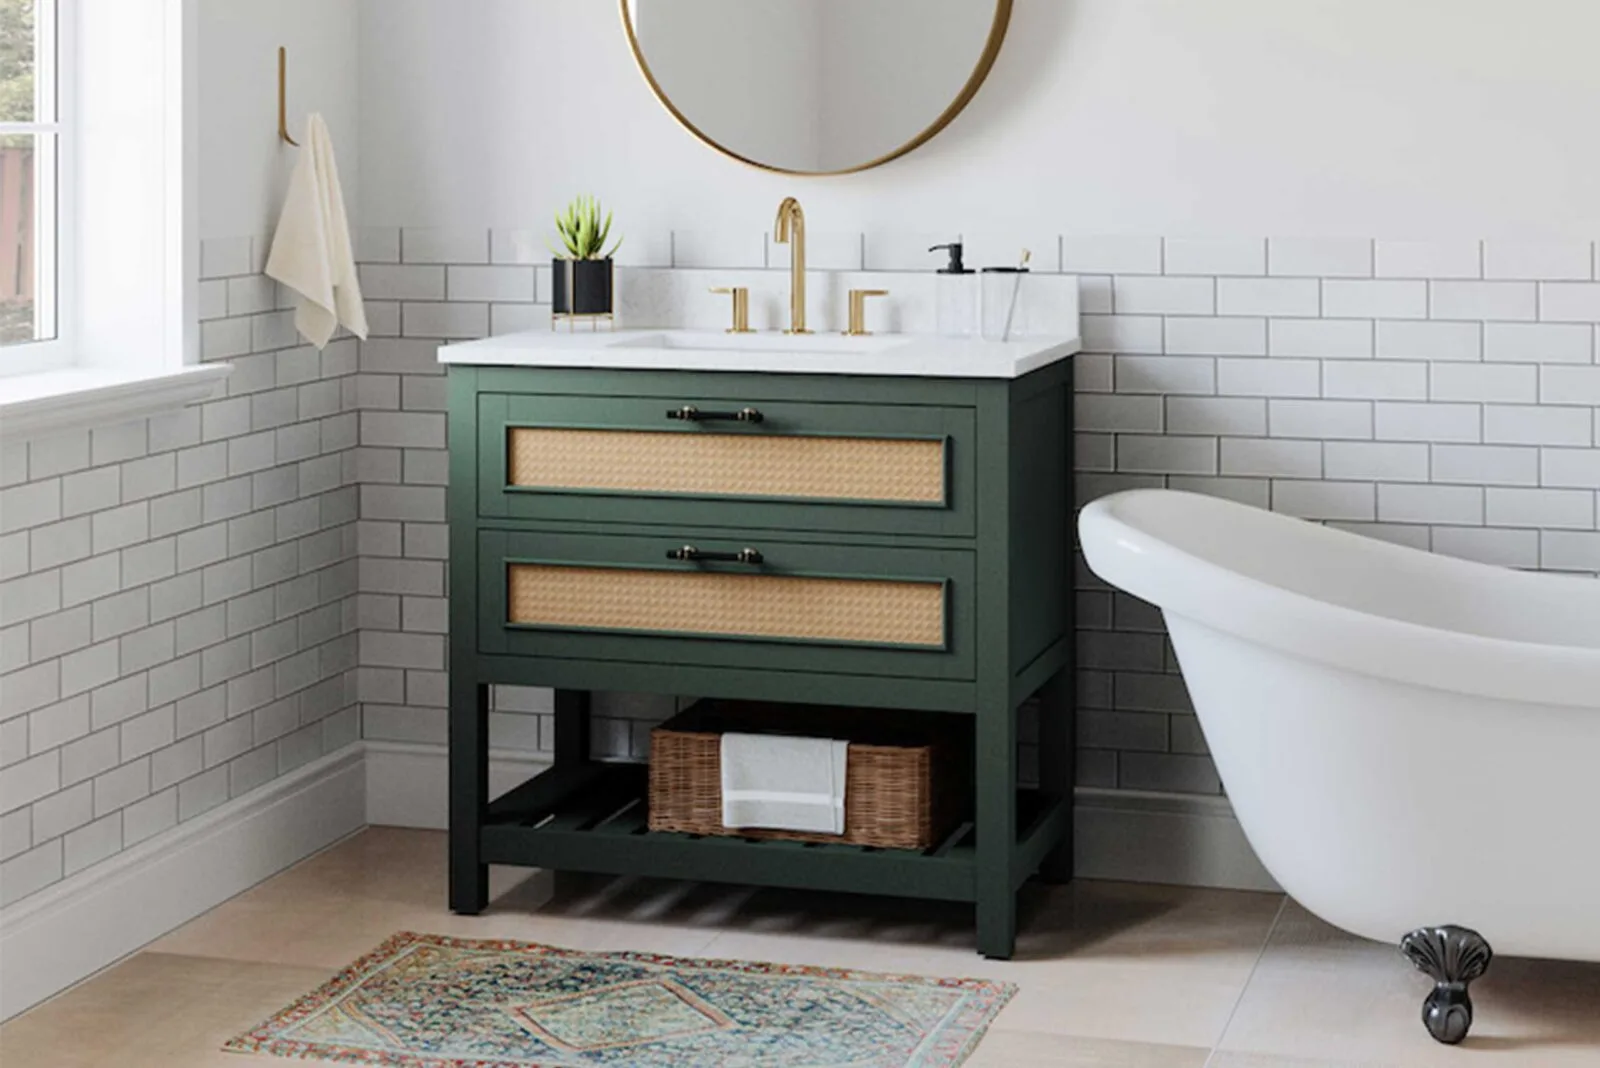 Search for Bathroom Countertop Shelf  Discover our Best Deals at Bed Bath  & Beyond